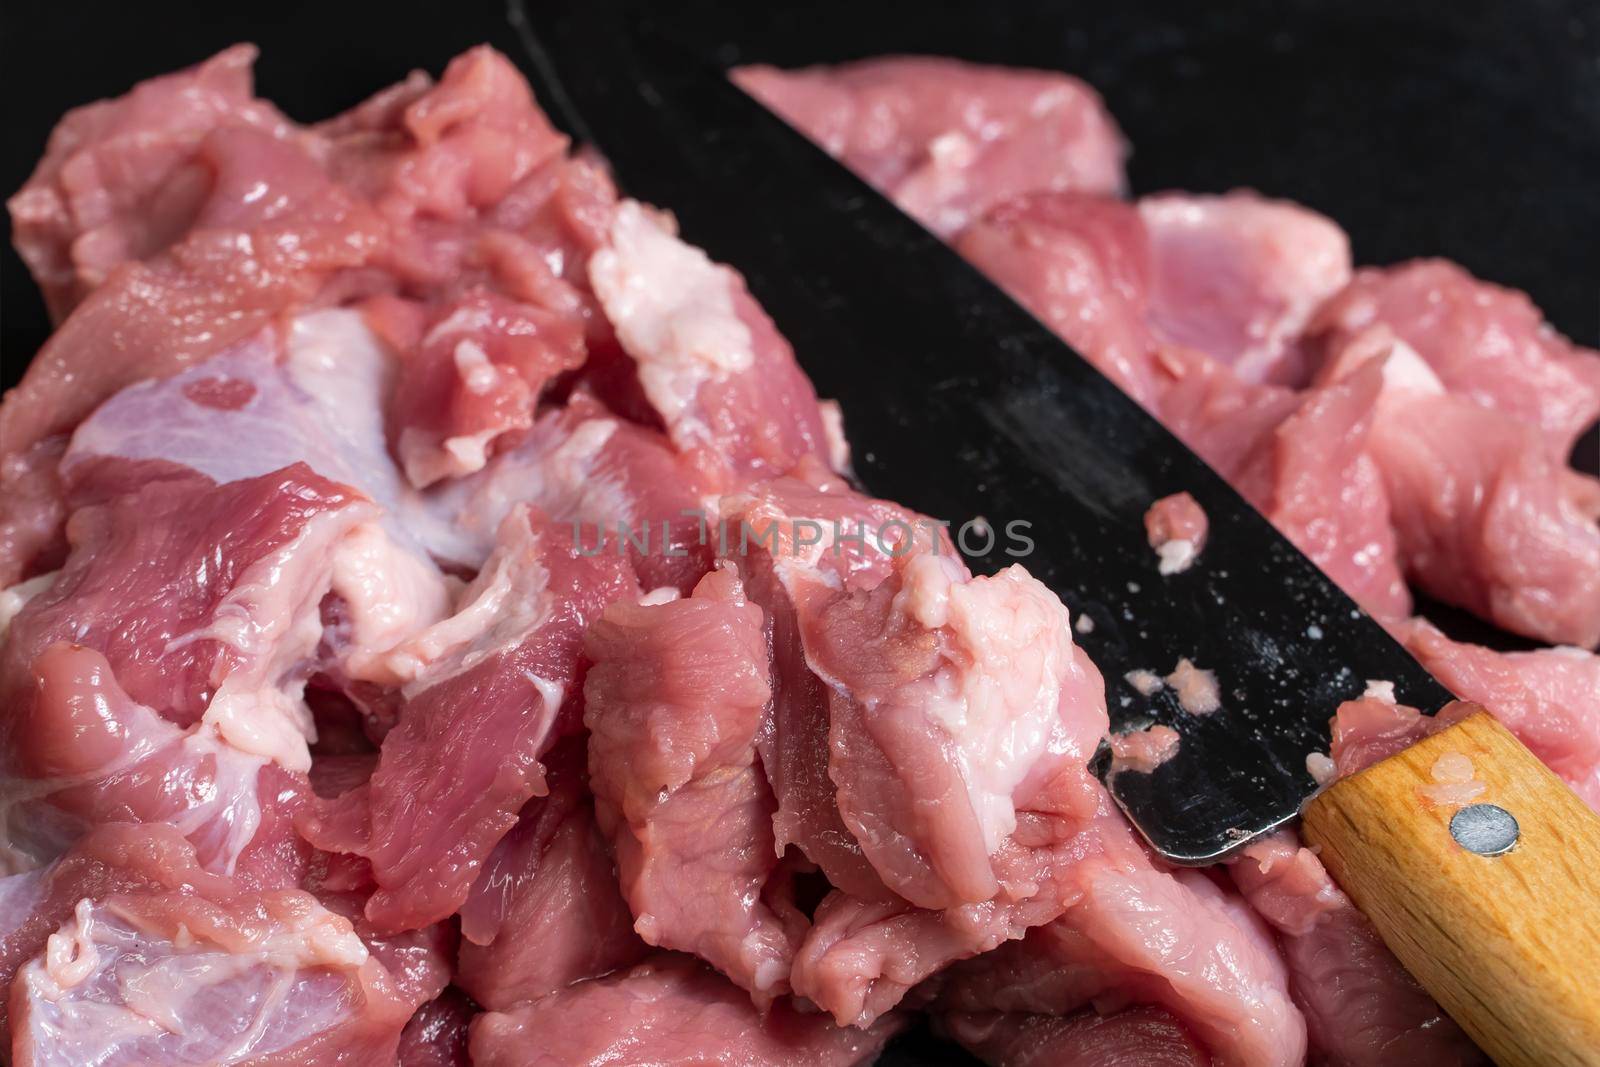 Slice the pork or beef with a knife on the table in close-up. Preparation of meat dishes and food products. Pieces of red meat for shish kebab, barbecue or kebab. Raw fresh meat is cut with a knife by YevgeniySam